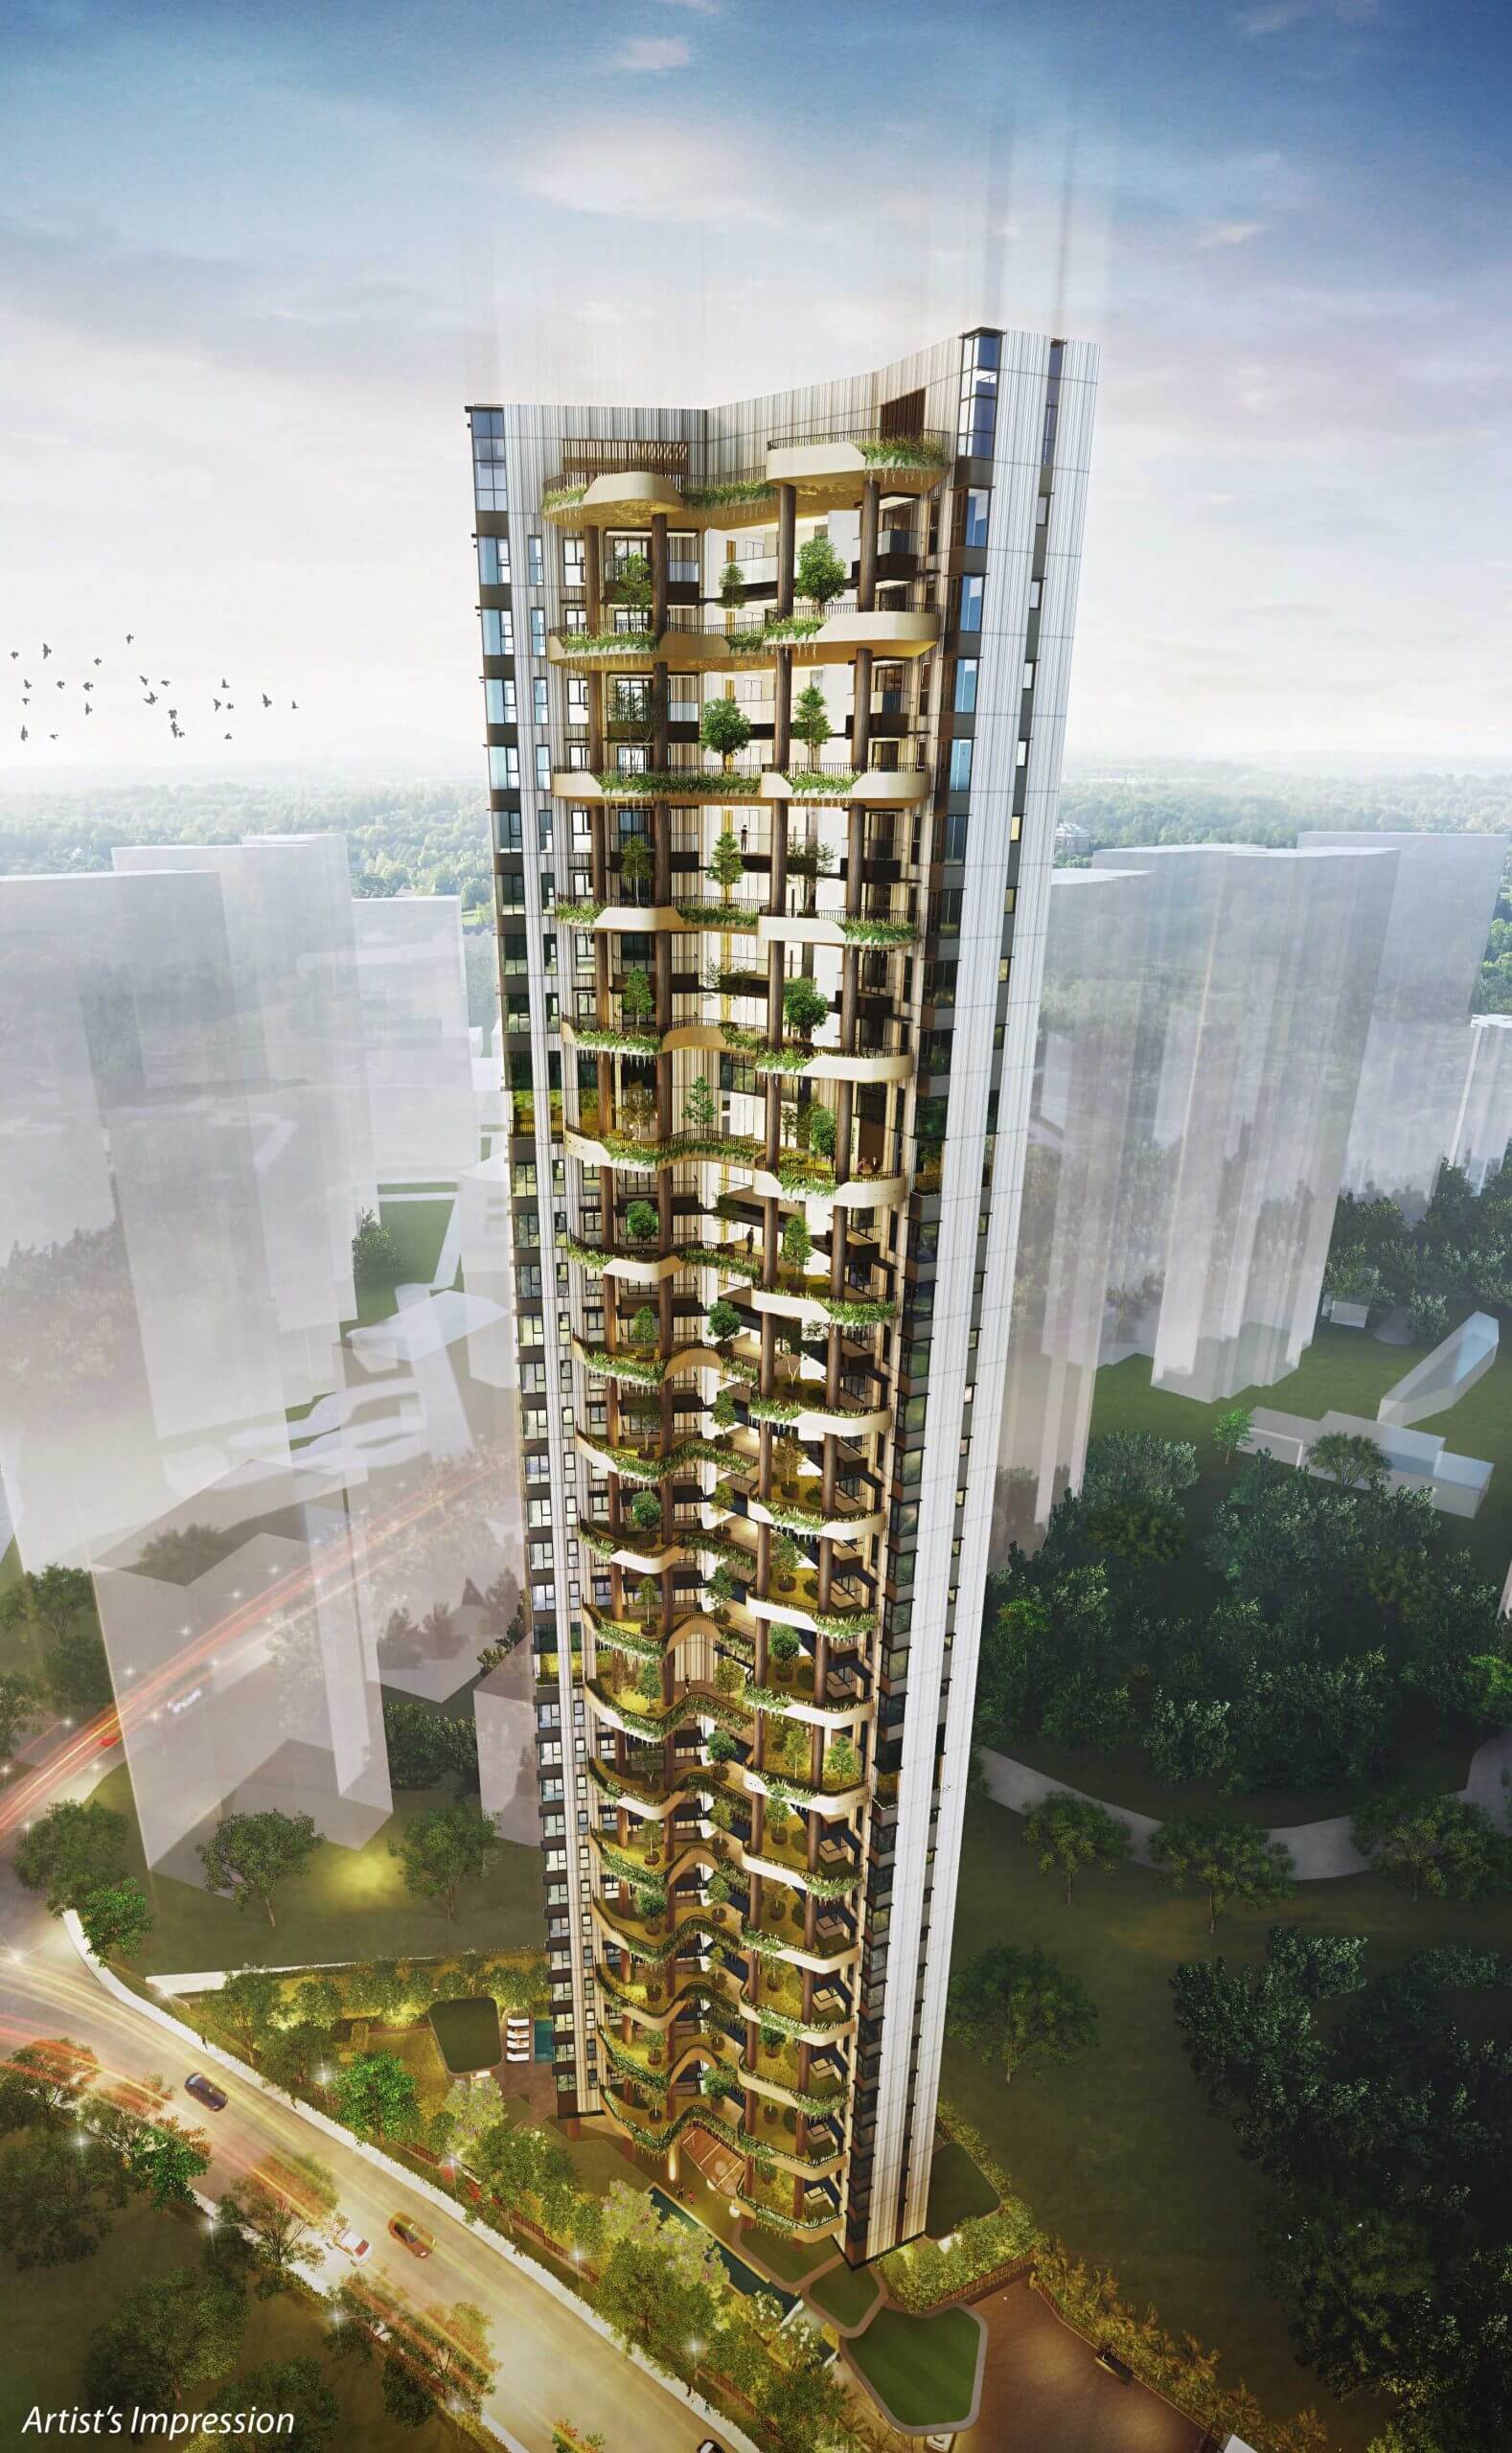 3 Draycott Park construction project of Welltech in Singapore